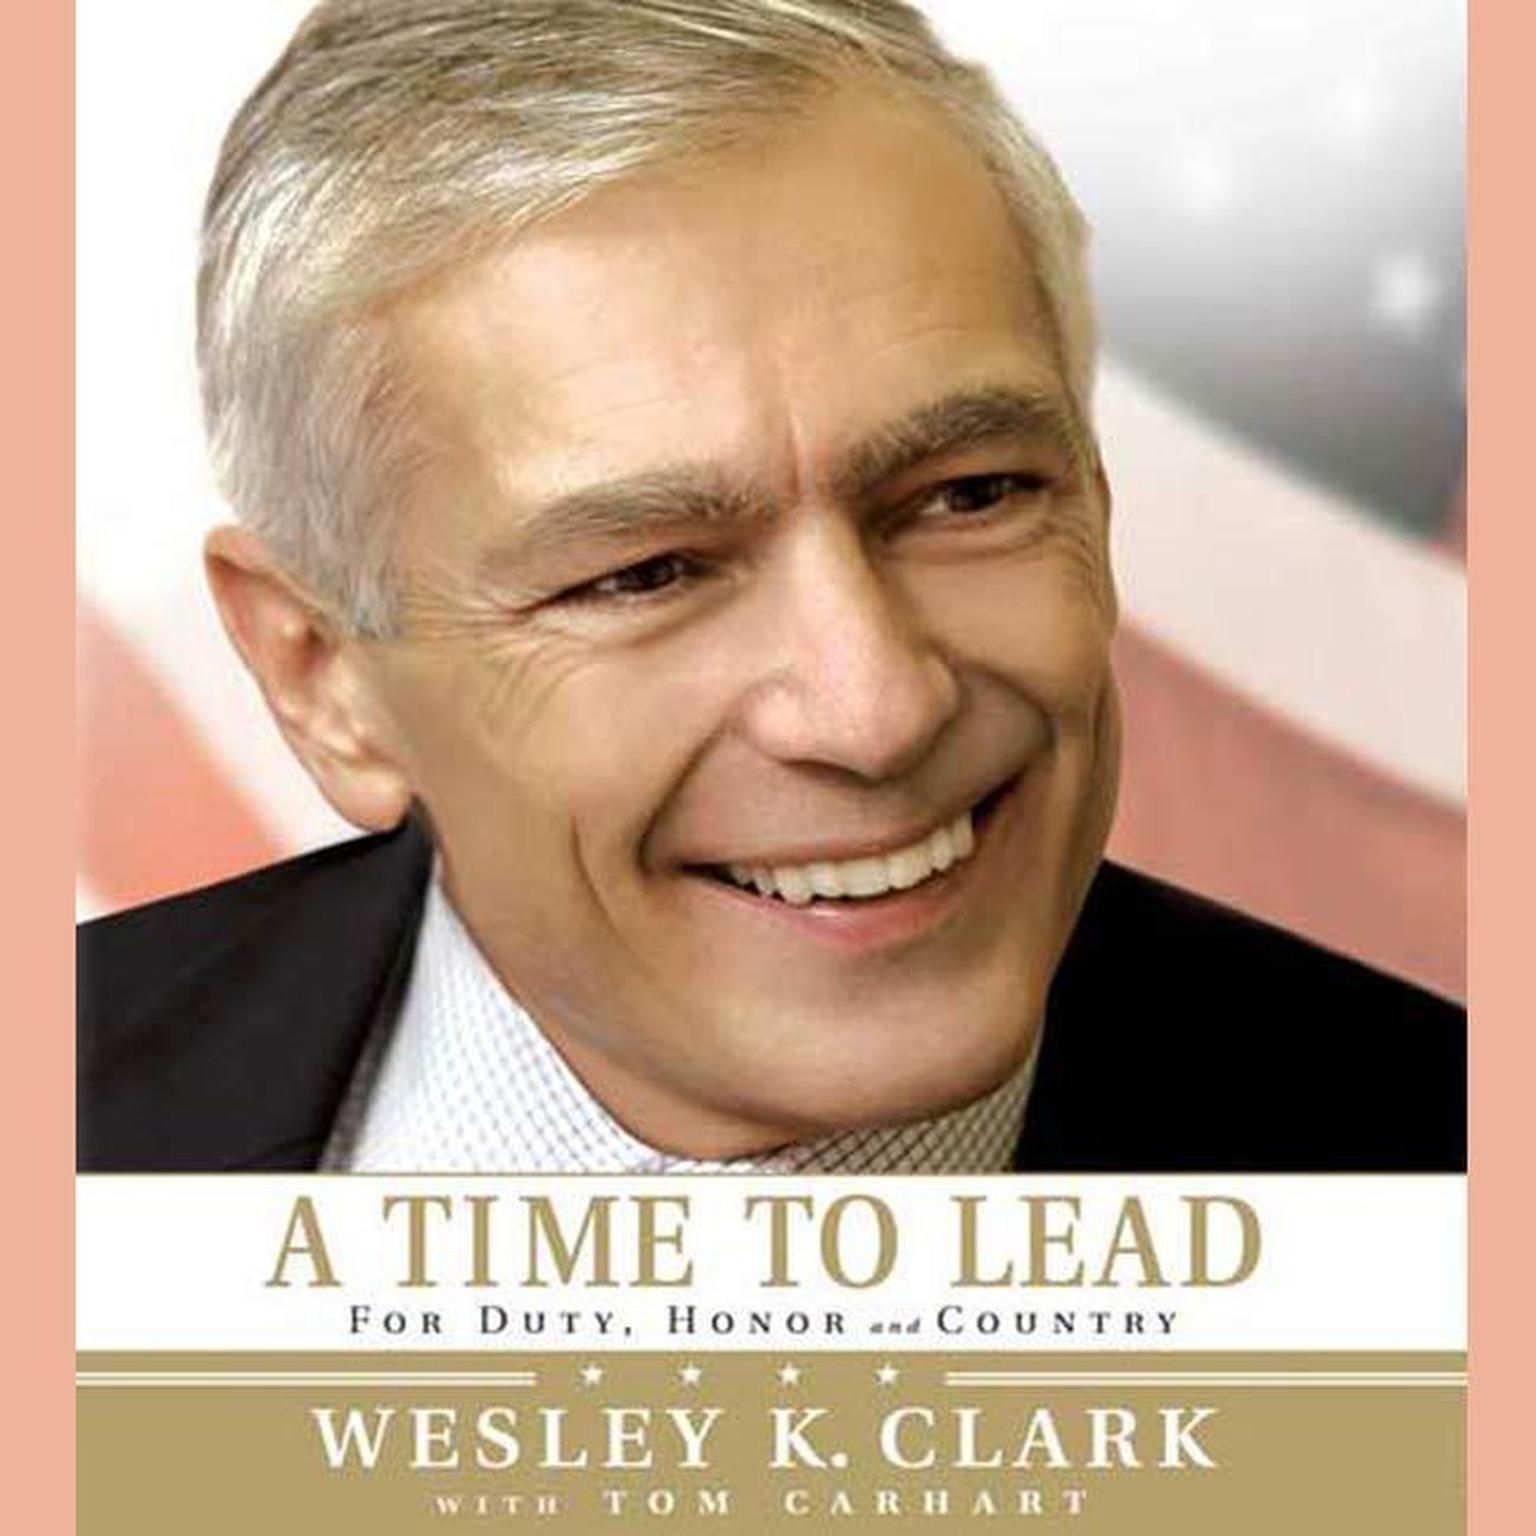 A Time to Lead: For Duty, Honor and Country Audiobook, by Wesley K. Clark